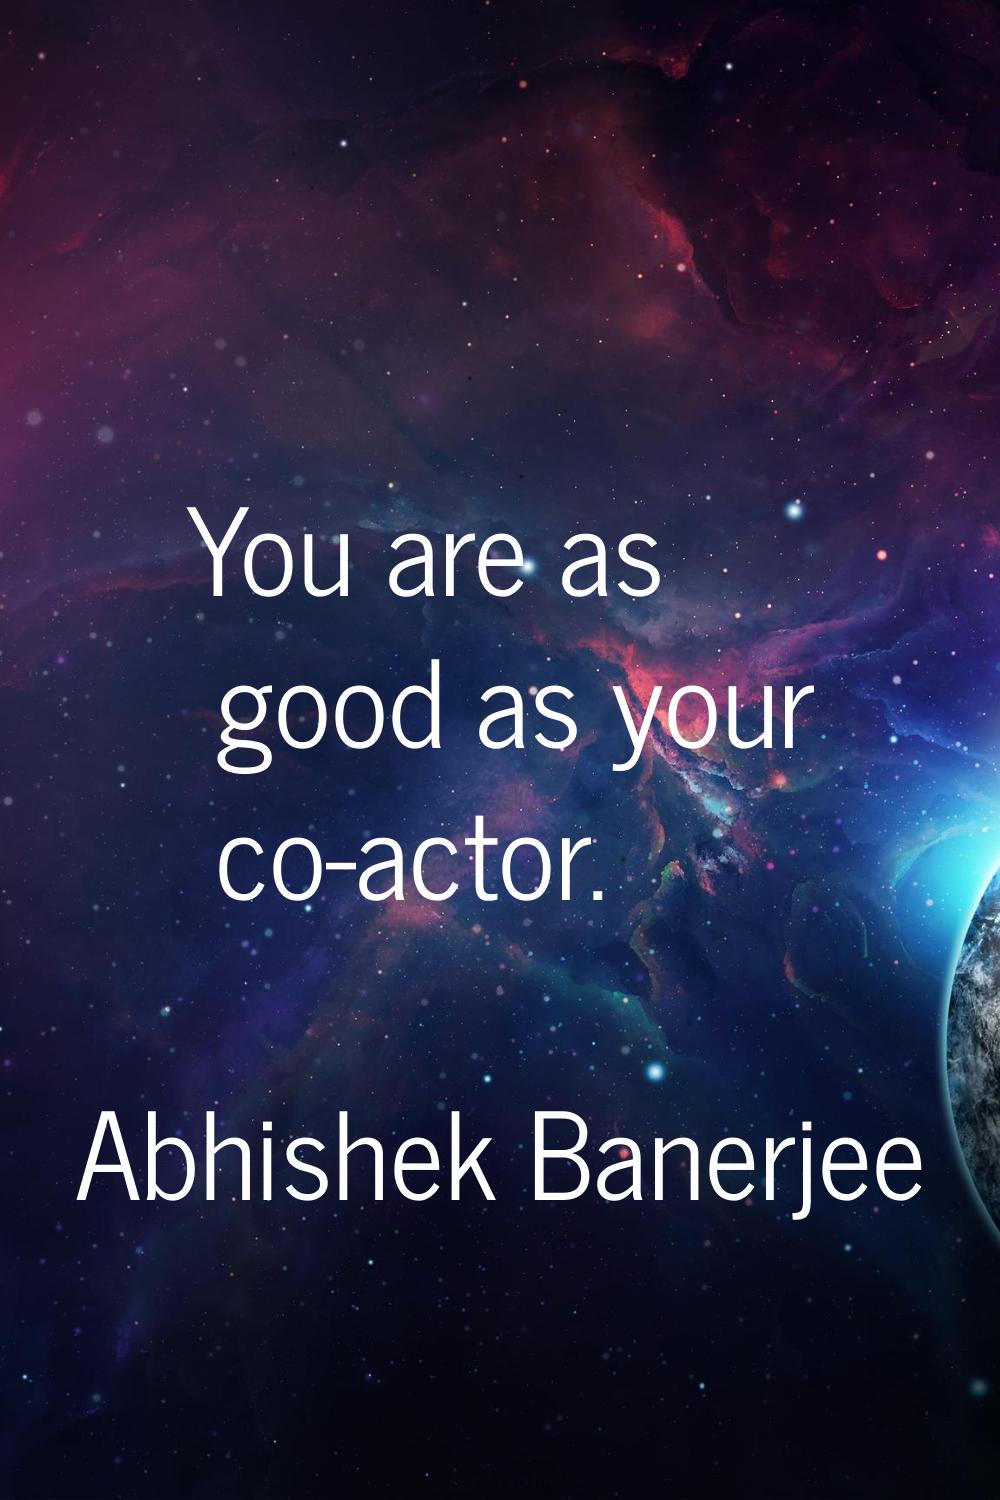 You are as good as your co-actor.